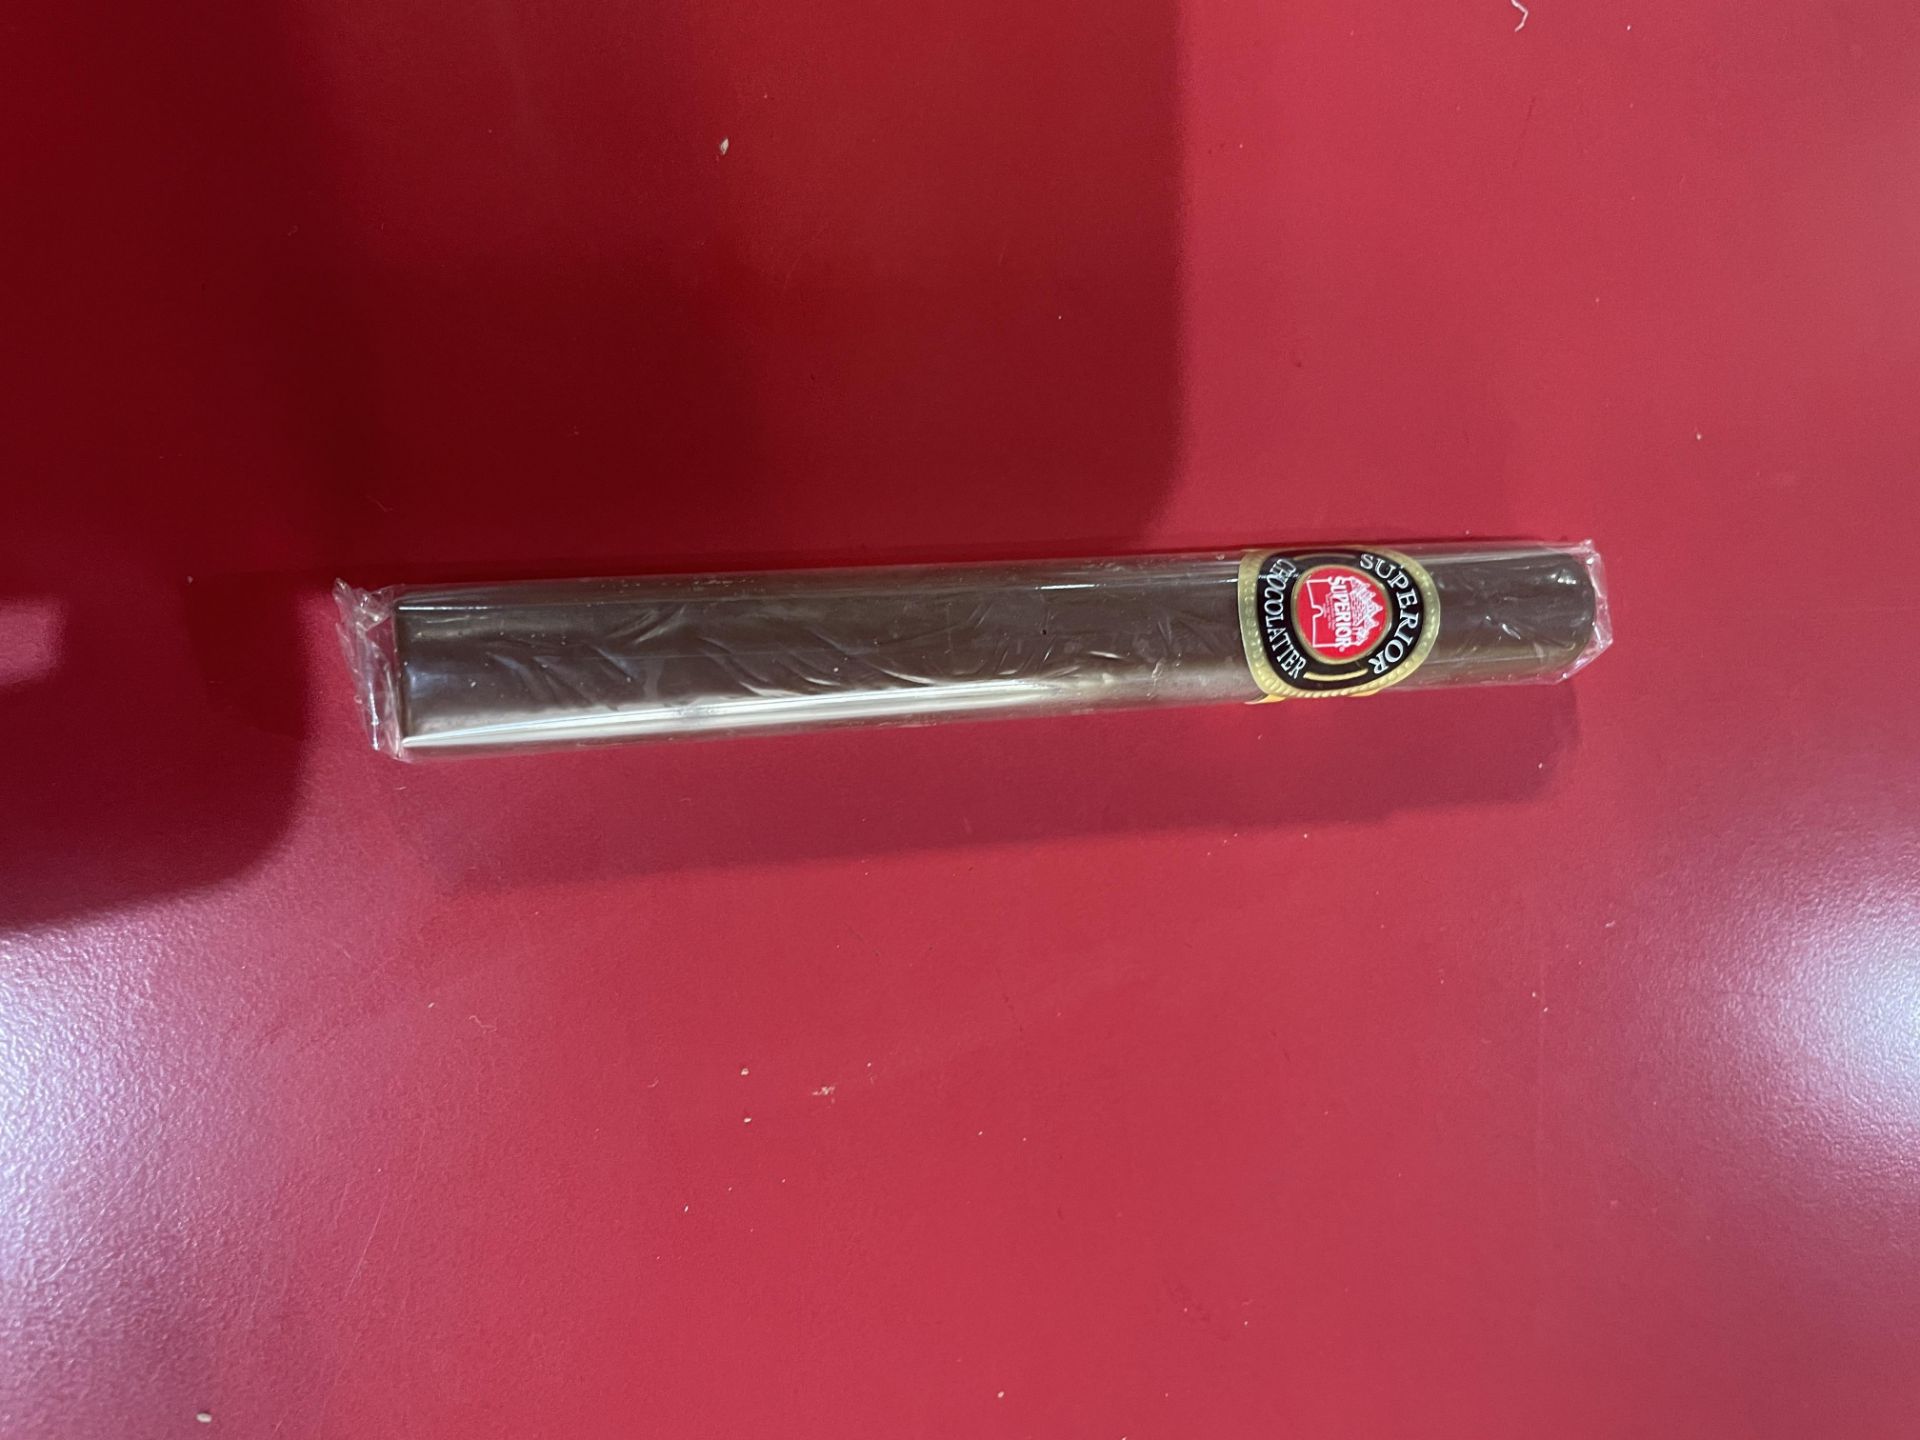 Verpackundgsmachinen Chocolate Cigar wrapping machine with cellophane overlap and paper cigar band - Image 12 of 13